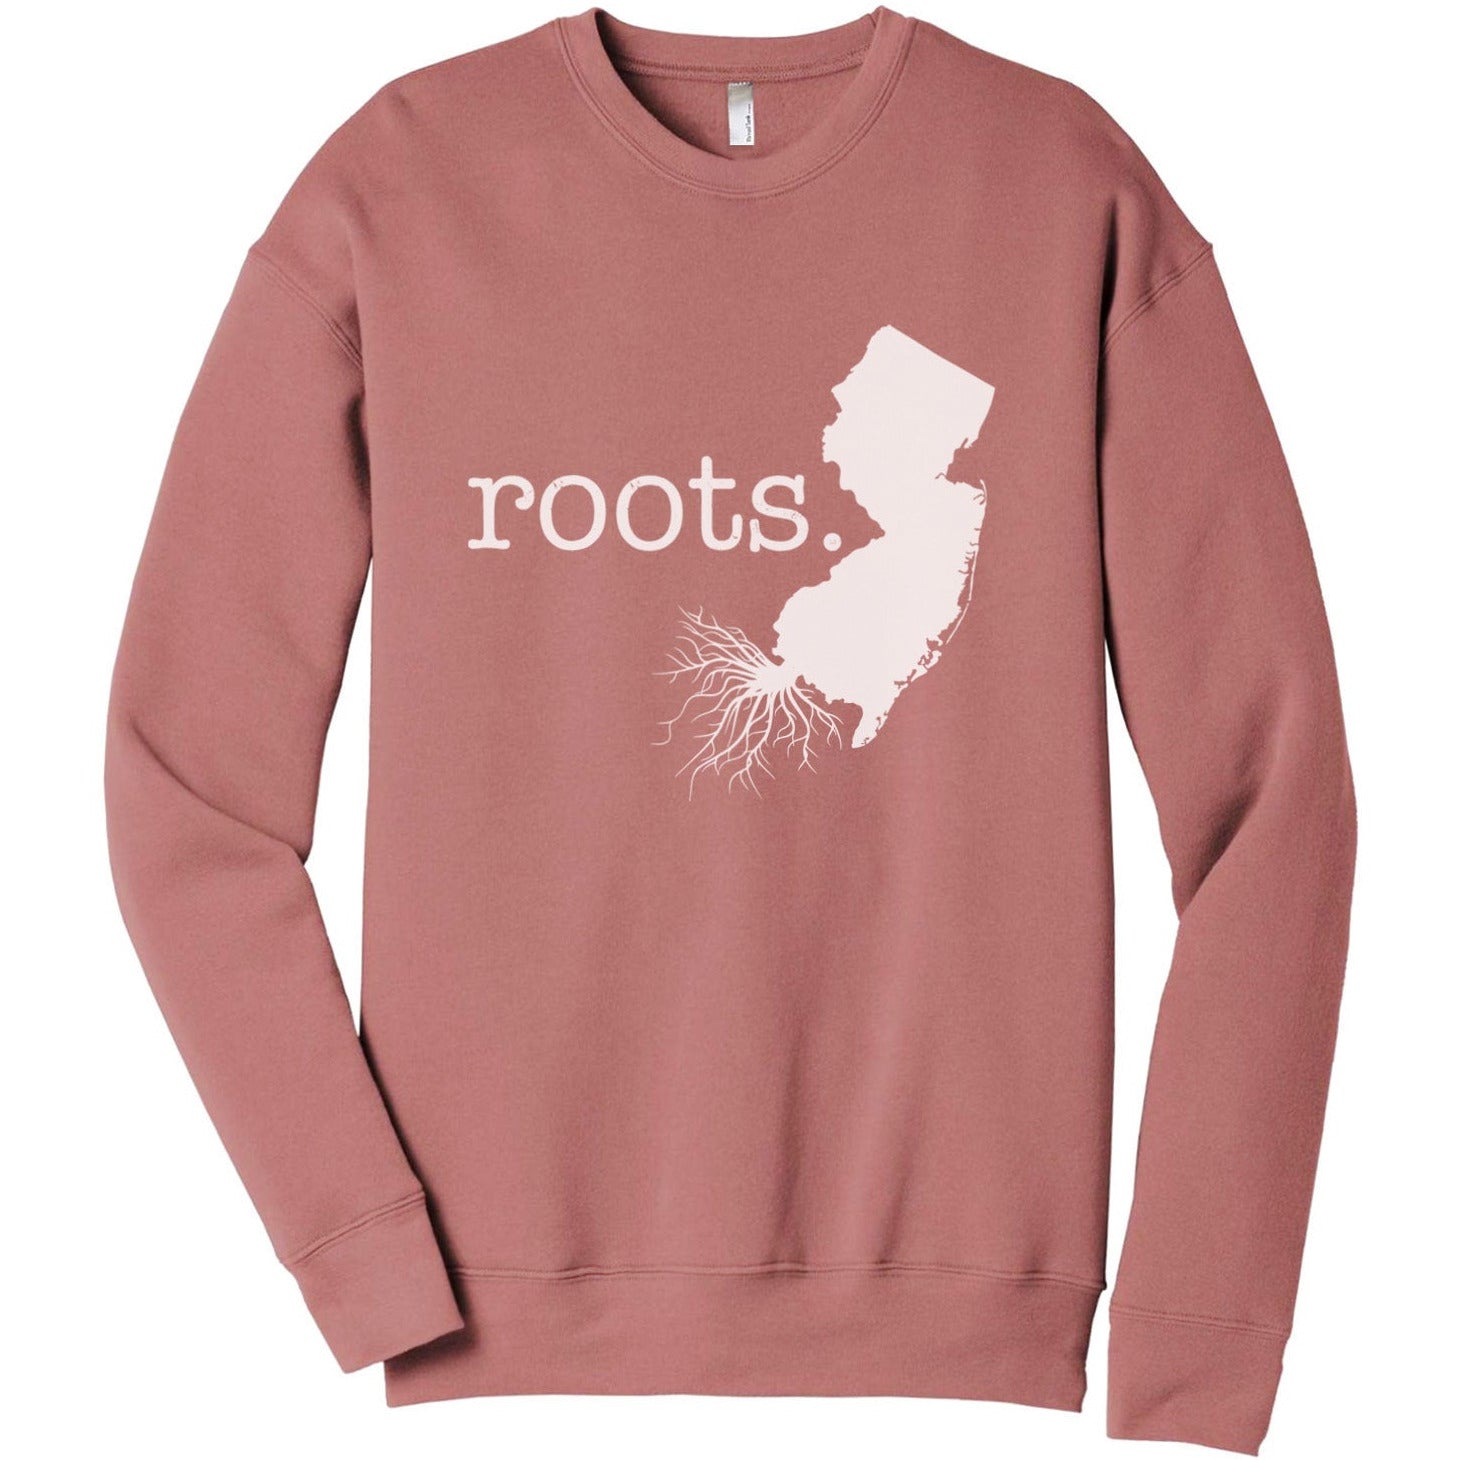 Roots State New Jersey - Stories You Can Wear